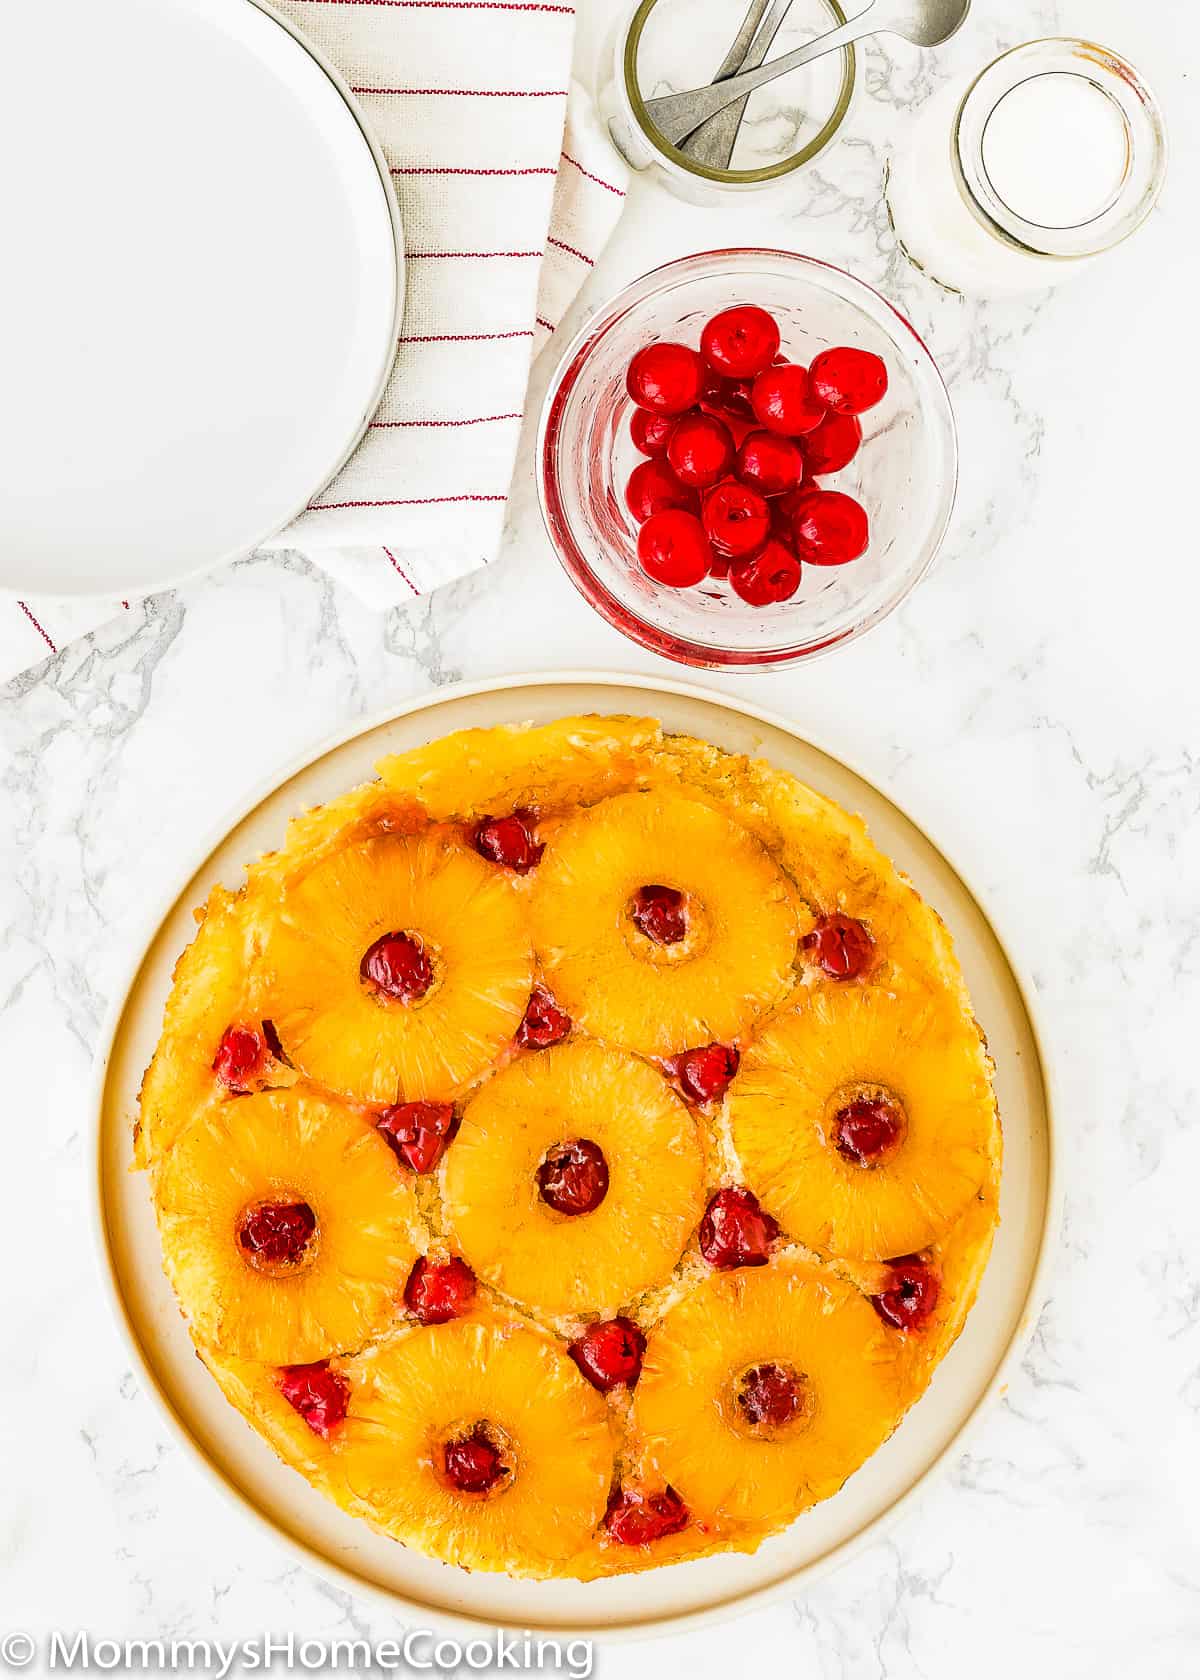 overhead view of an Eggless Pineapple Upside Down Cake on a plate with cherries and plates on the sides.